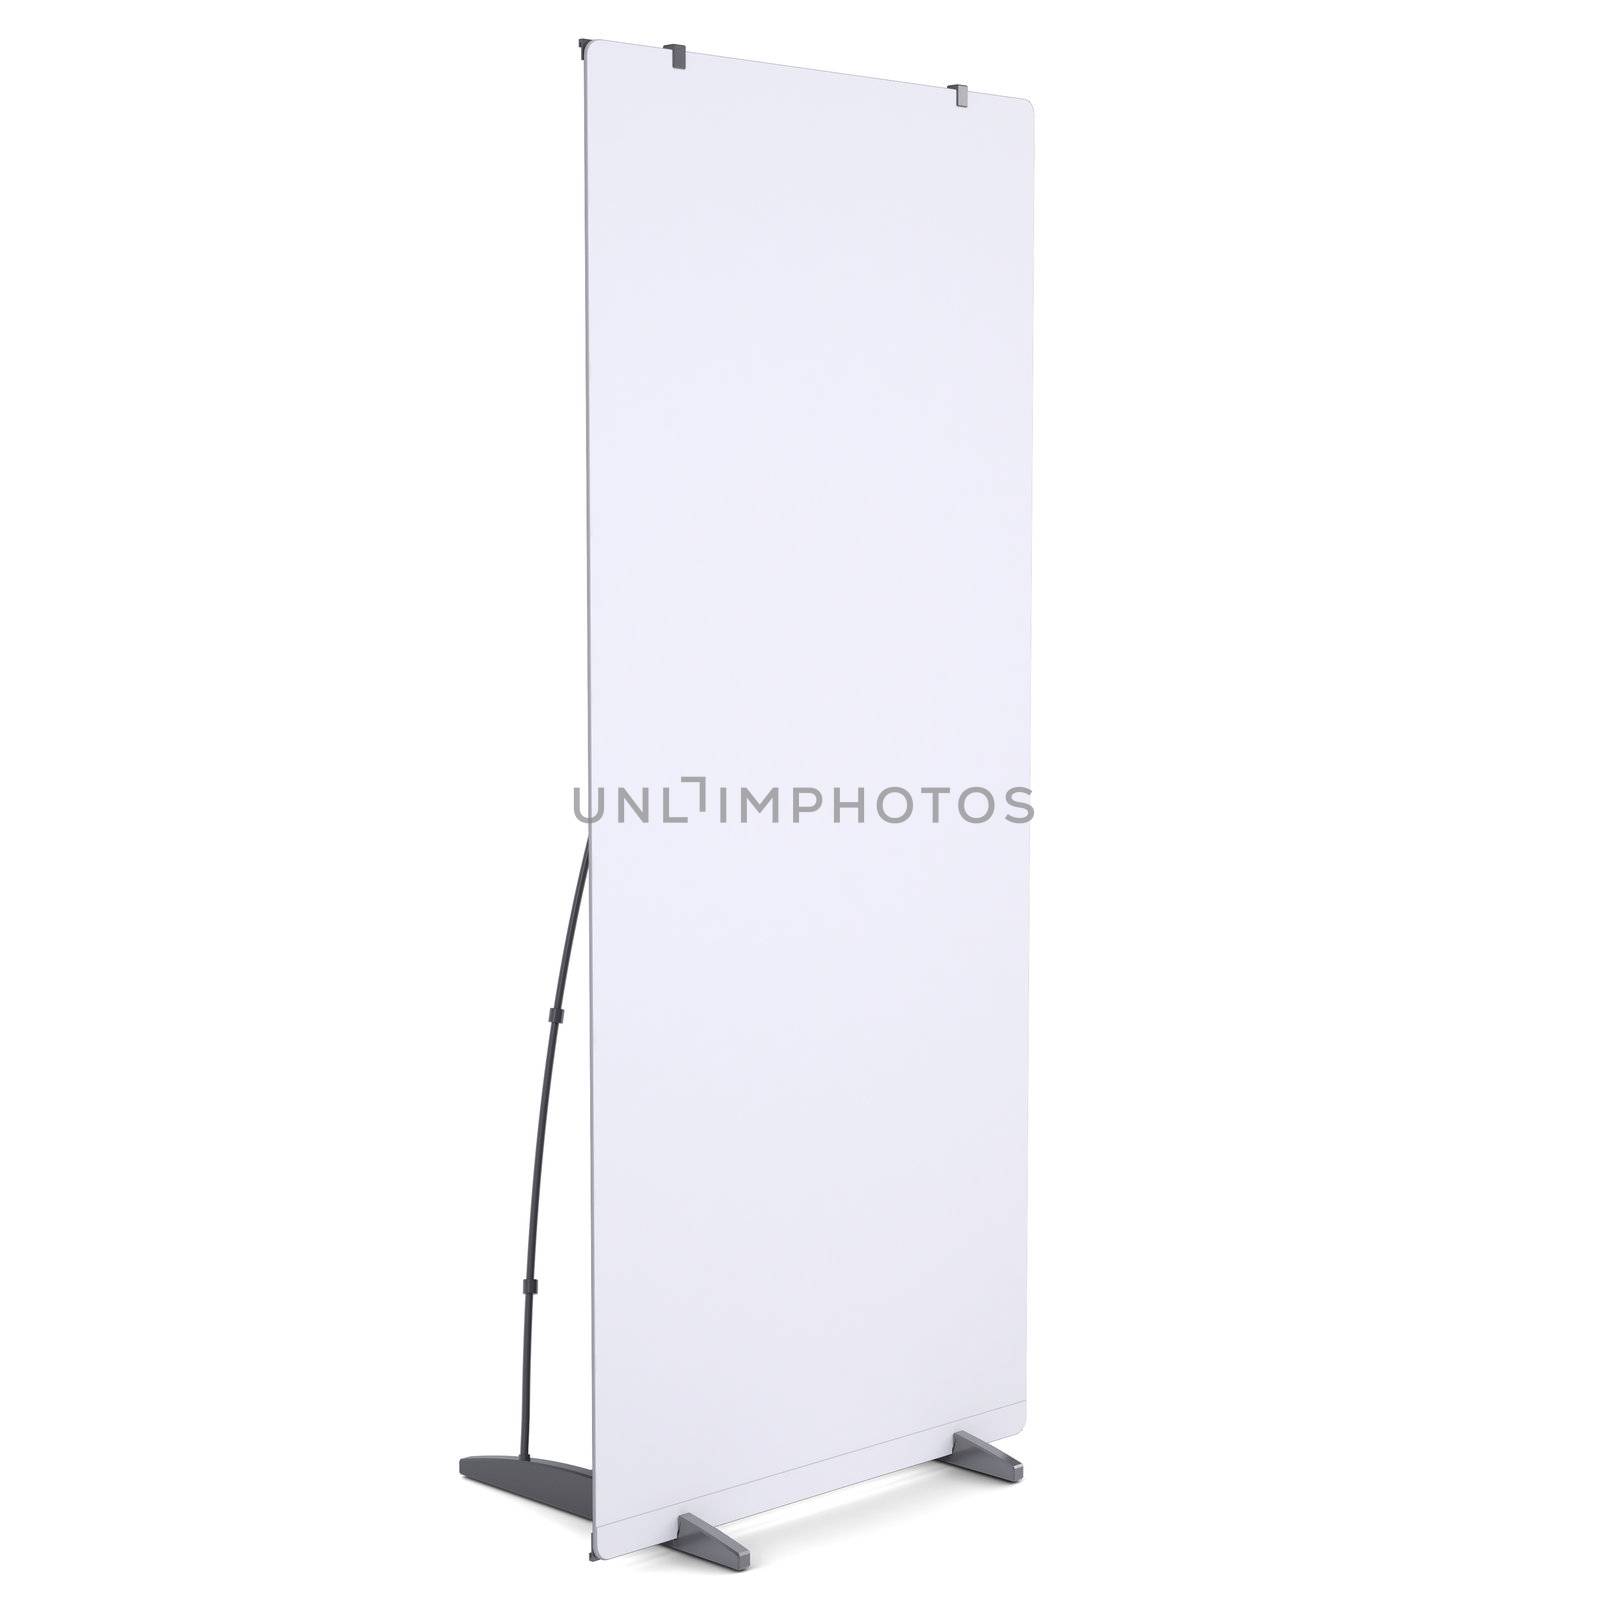 White advertising billboard. Isolated render on a white background